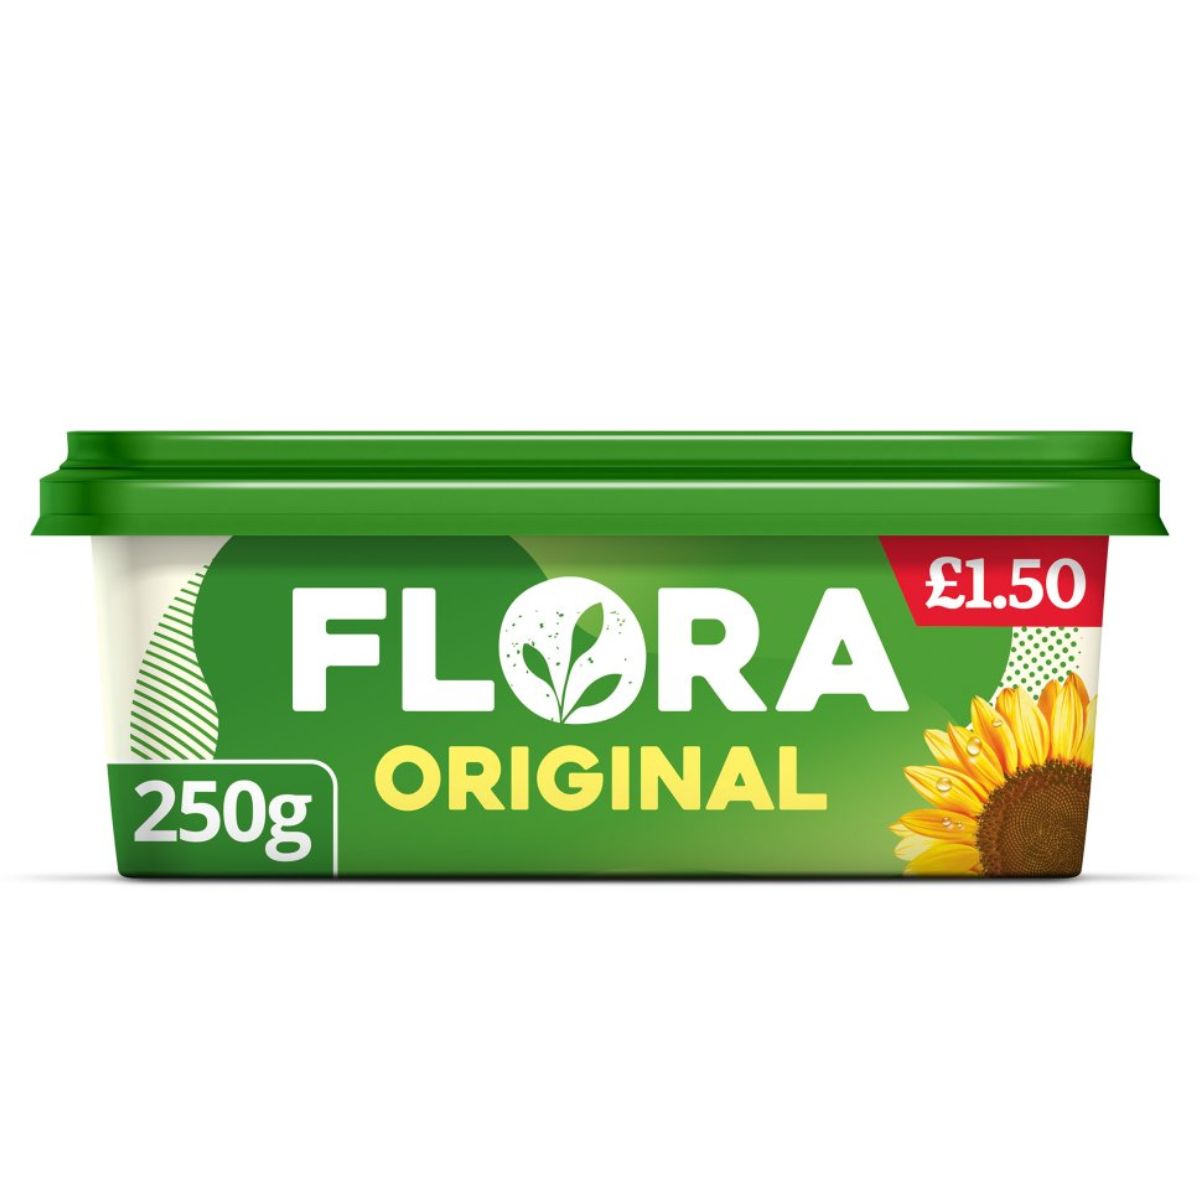 A container of Flora - Original - 250g on a white background.